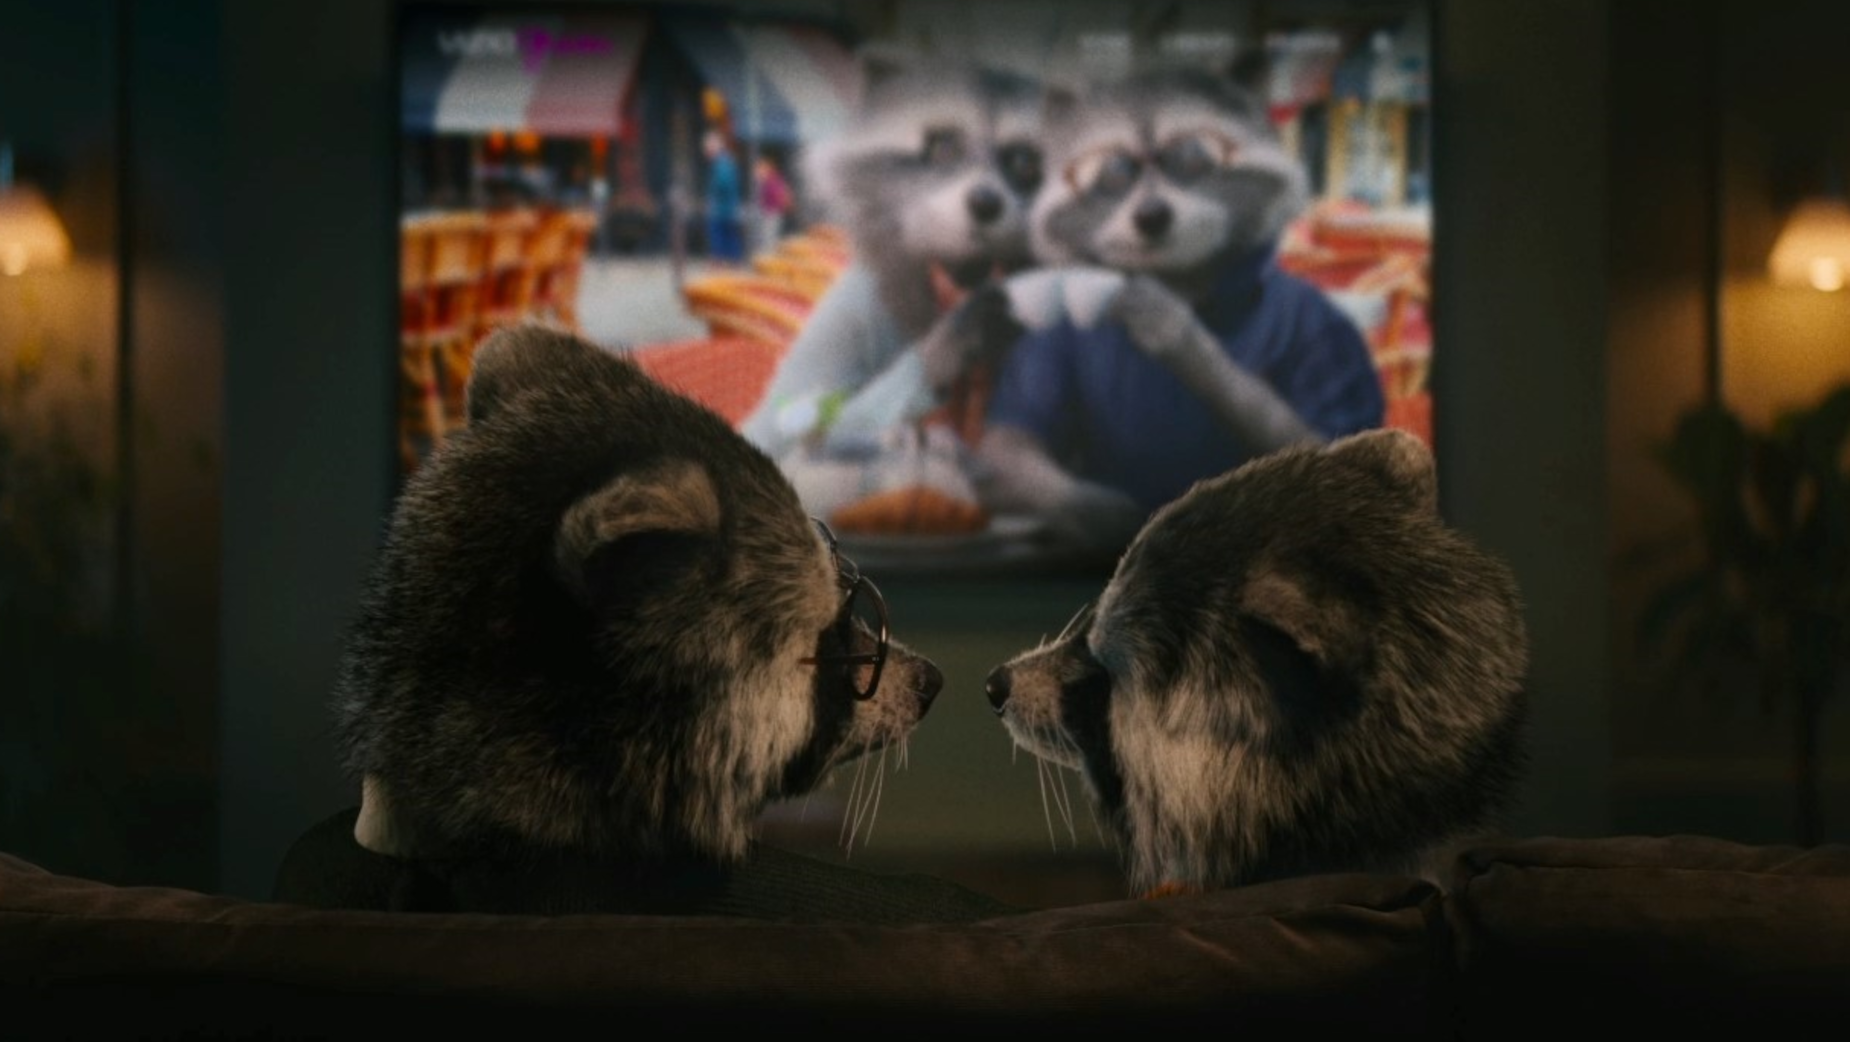 Adorable Raccoons Have the Perfect Evening in VIZIO Campaign